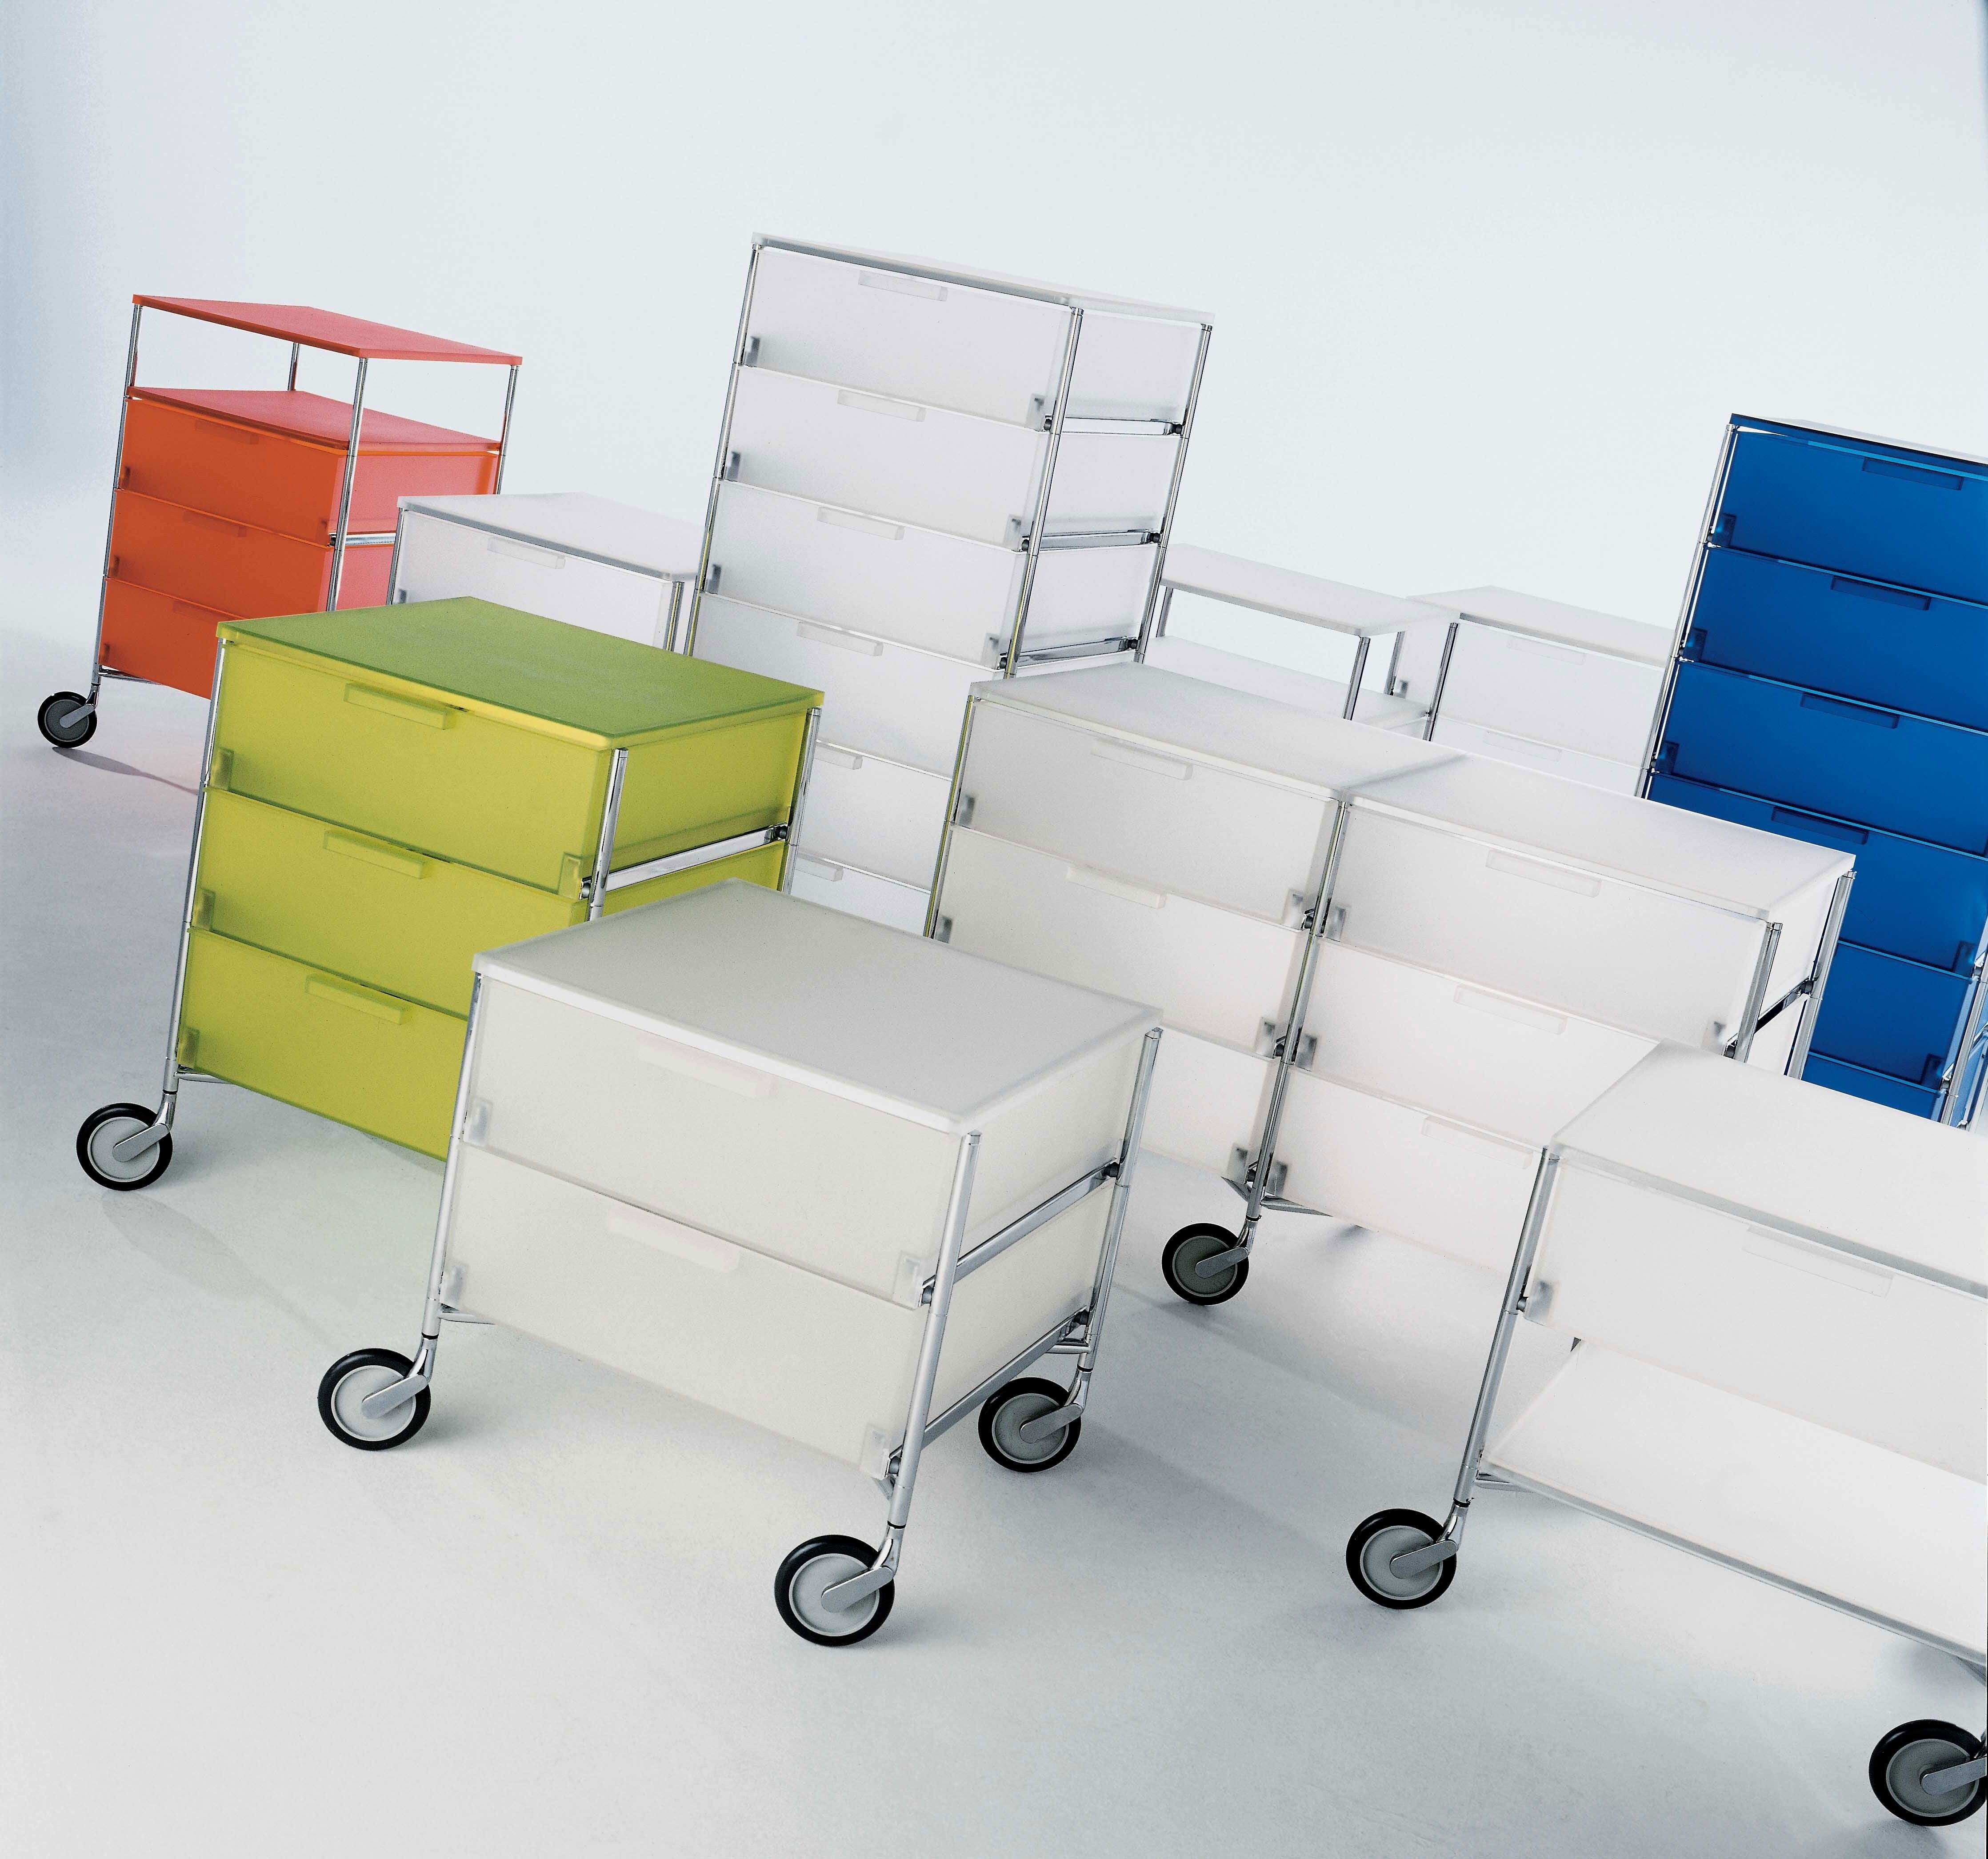 Kartell Mobil Container 6 Drawers w Wheels